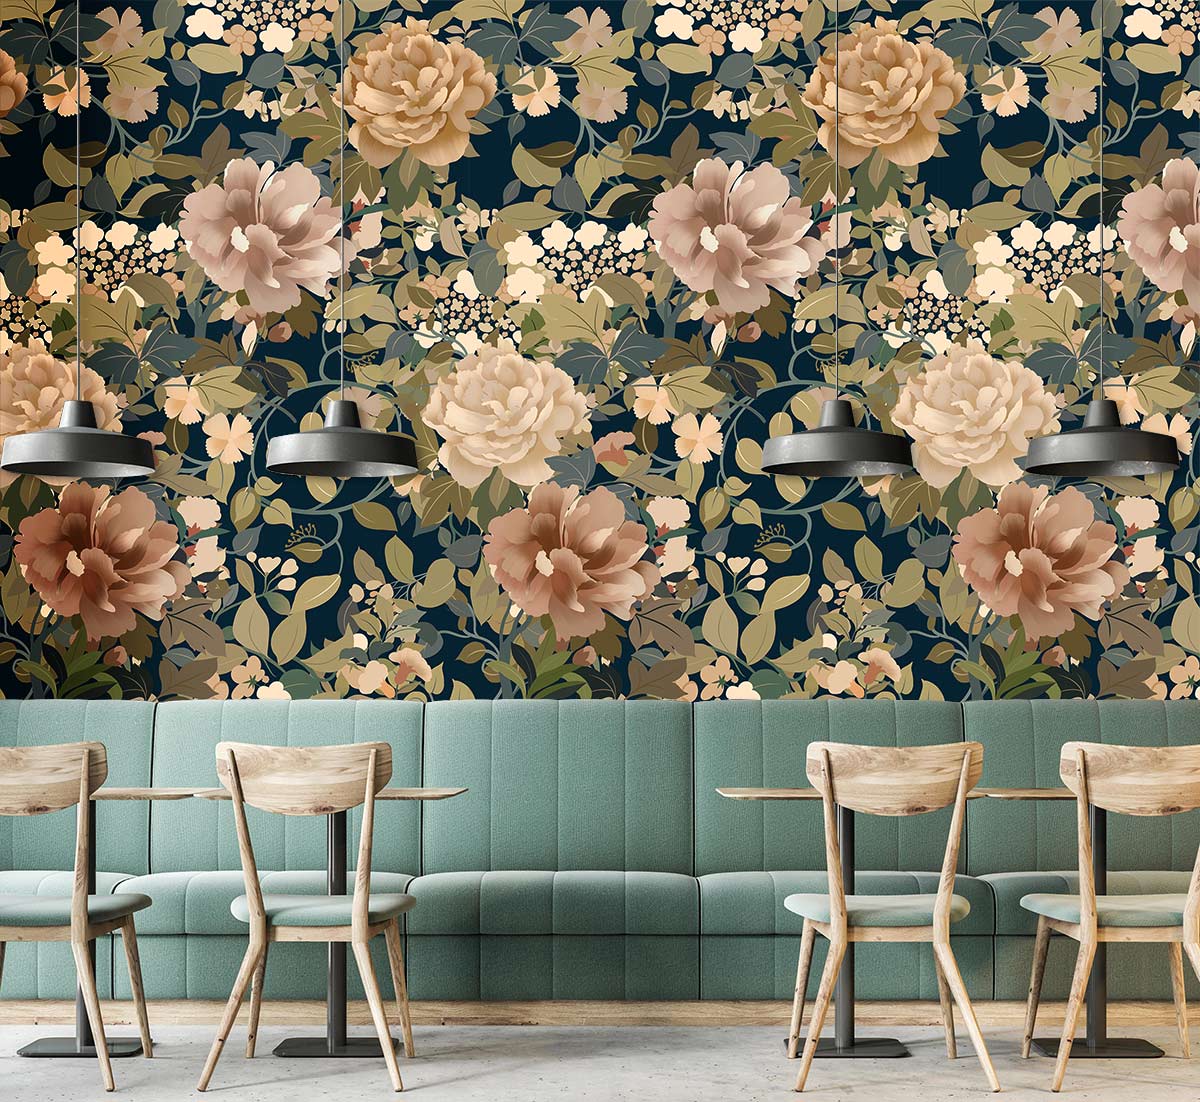 Golden Blossoms Wallpaper Mural for the Decorative Purposes of the Dining Room Space